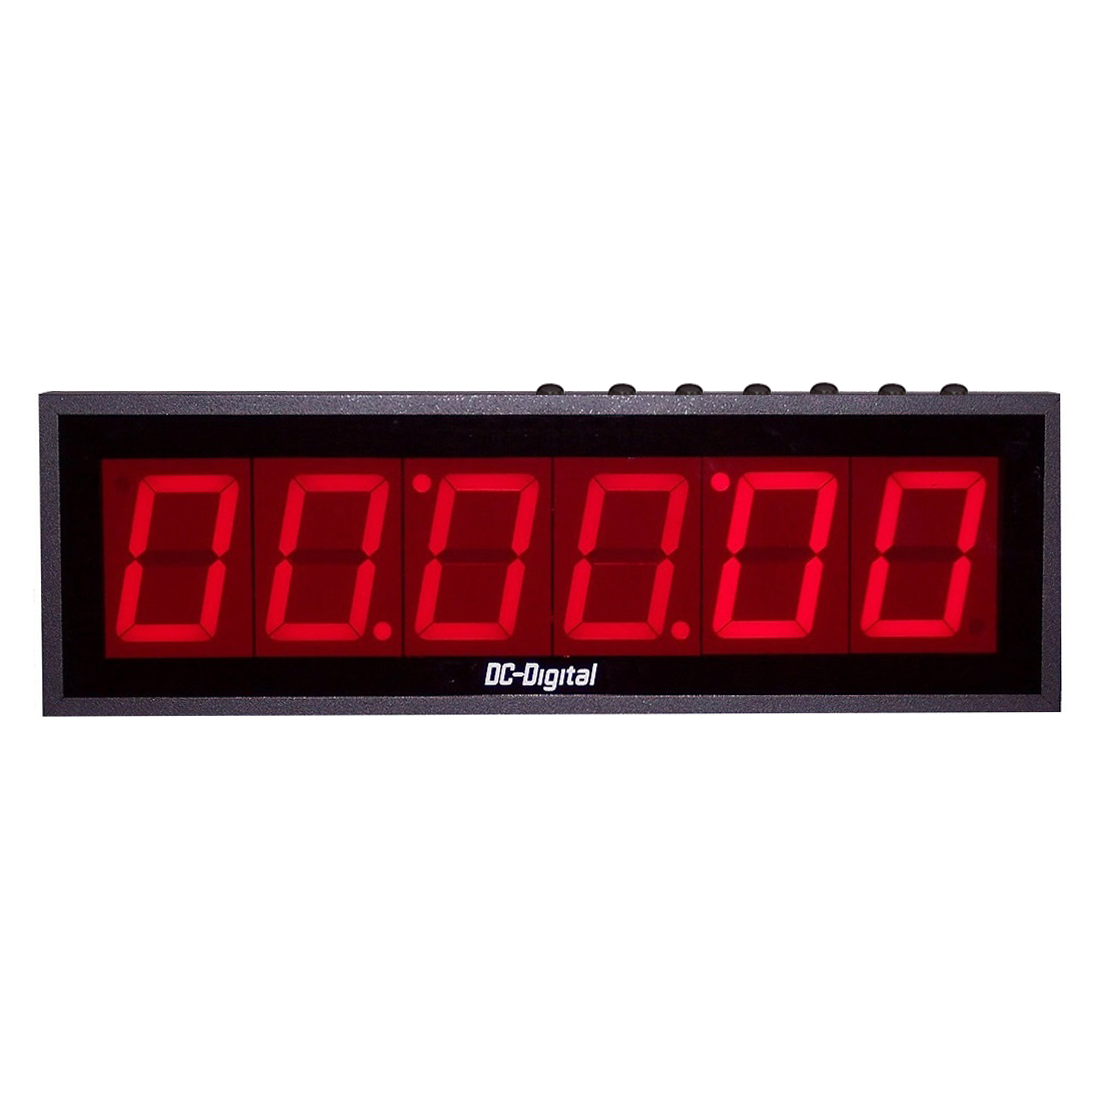 (DC-406UT) 4.0 Inch LED, Push-Button Controlled, Count Up, Countdown Timer, Time-of-Day Clock, Hours, Minutes, Seconds